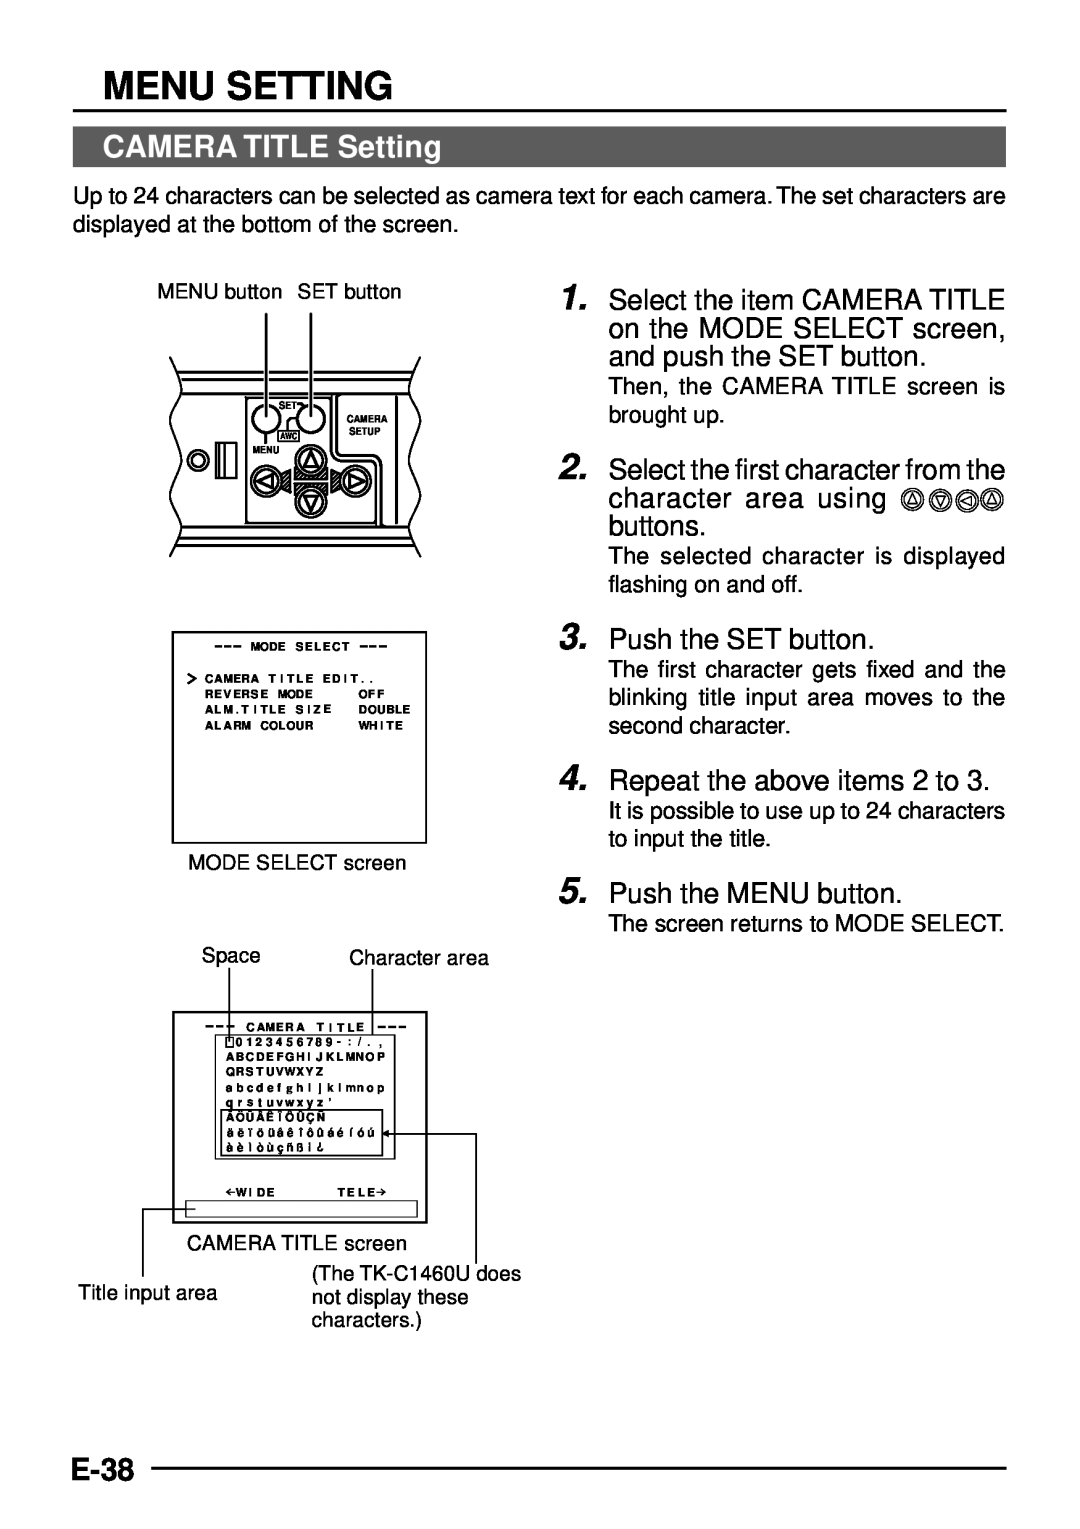 JVC TK-C1460 CAMERA TITLE Setting, E-38, Select the first character from the character area using buttons, Menu Setting 